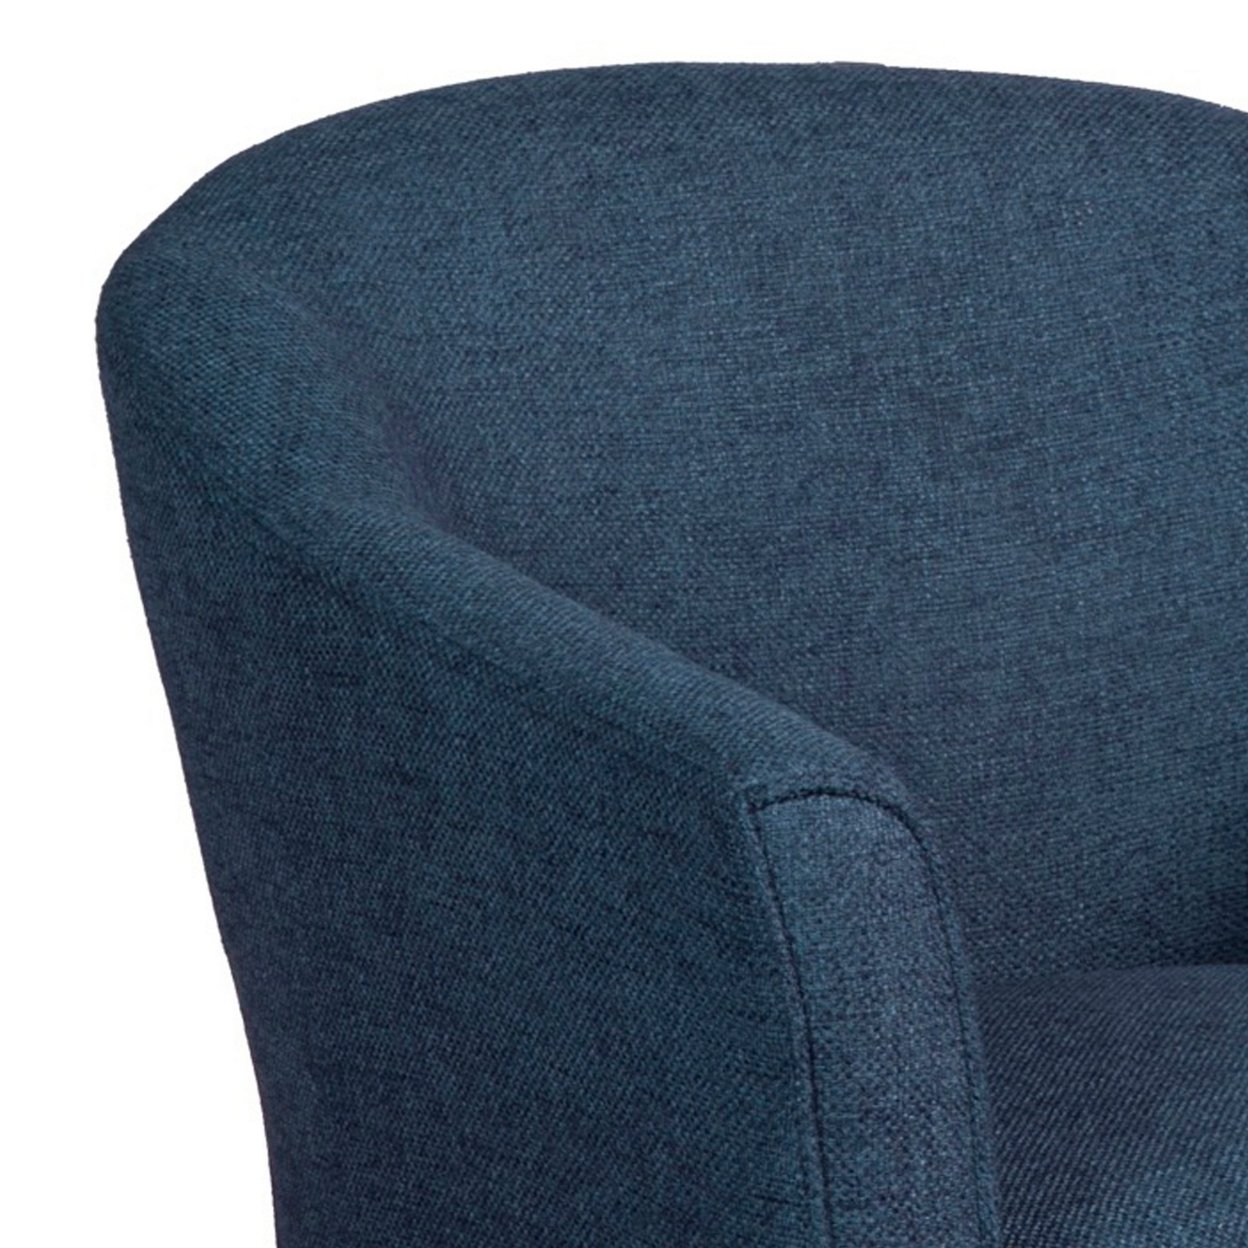 Fabric Upholstered Wooden Accent Chair With Curved Back, Blue And Brown- Saltoro Sherpi